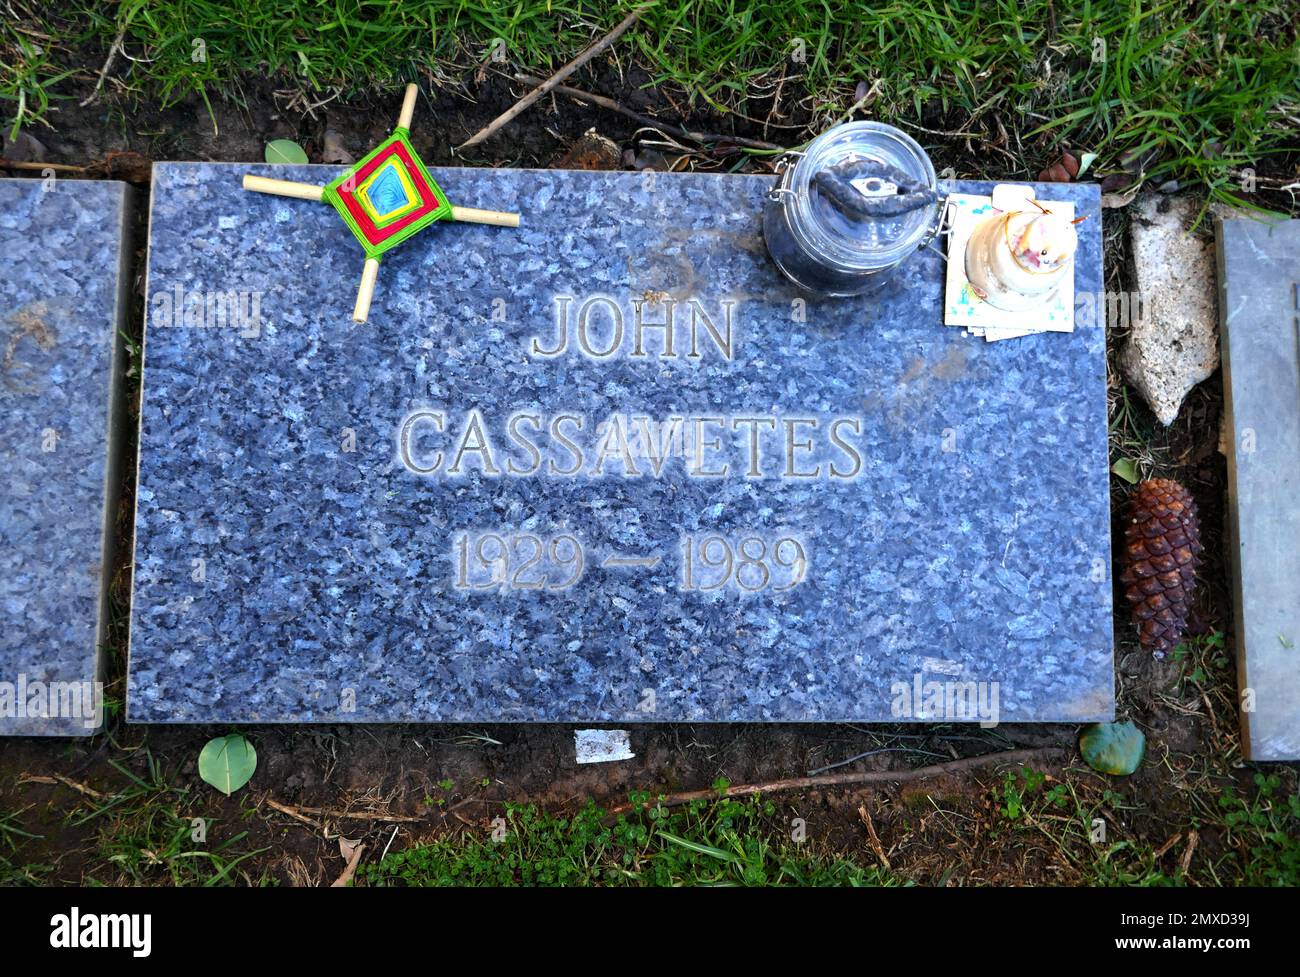 Los Angeles, California, USA 31st January 2023 A general view of atmosphere of Director John Cassavetes Grave at Pierce Brothers Westwood Village Memorial Park Cemetery on January 31, 2023 in Los Angeles, California, USA. Photo by Barry King/Alamy Stock Photo Stock Photo